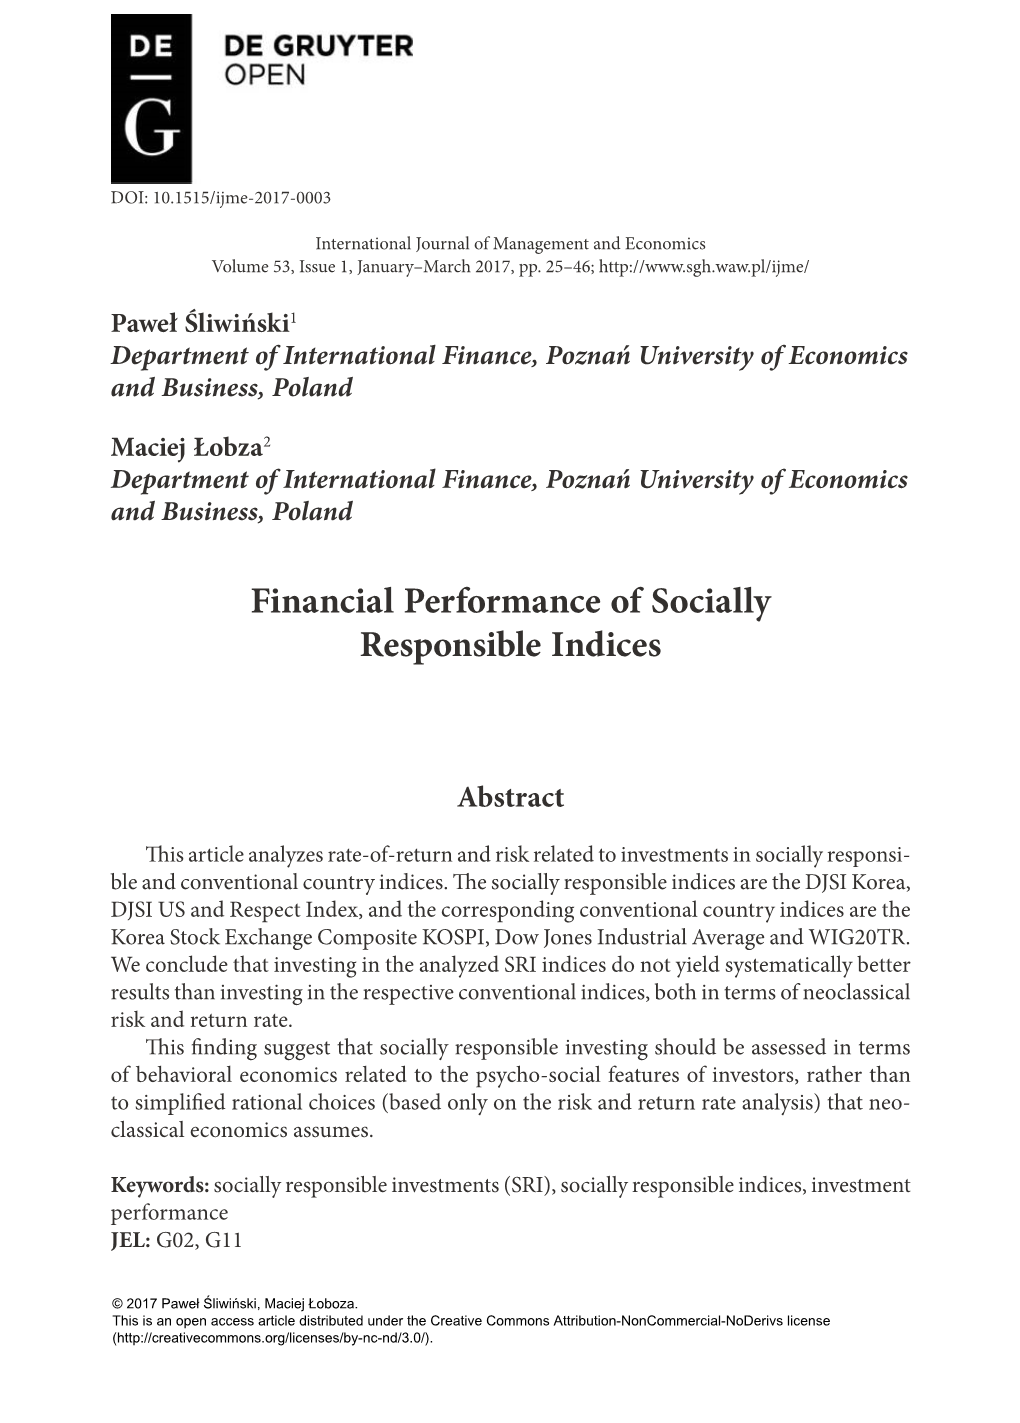 Financial Performance of Socially Responsible Indices